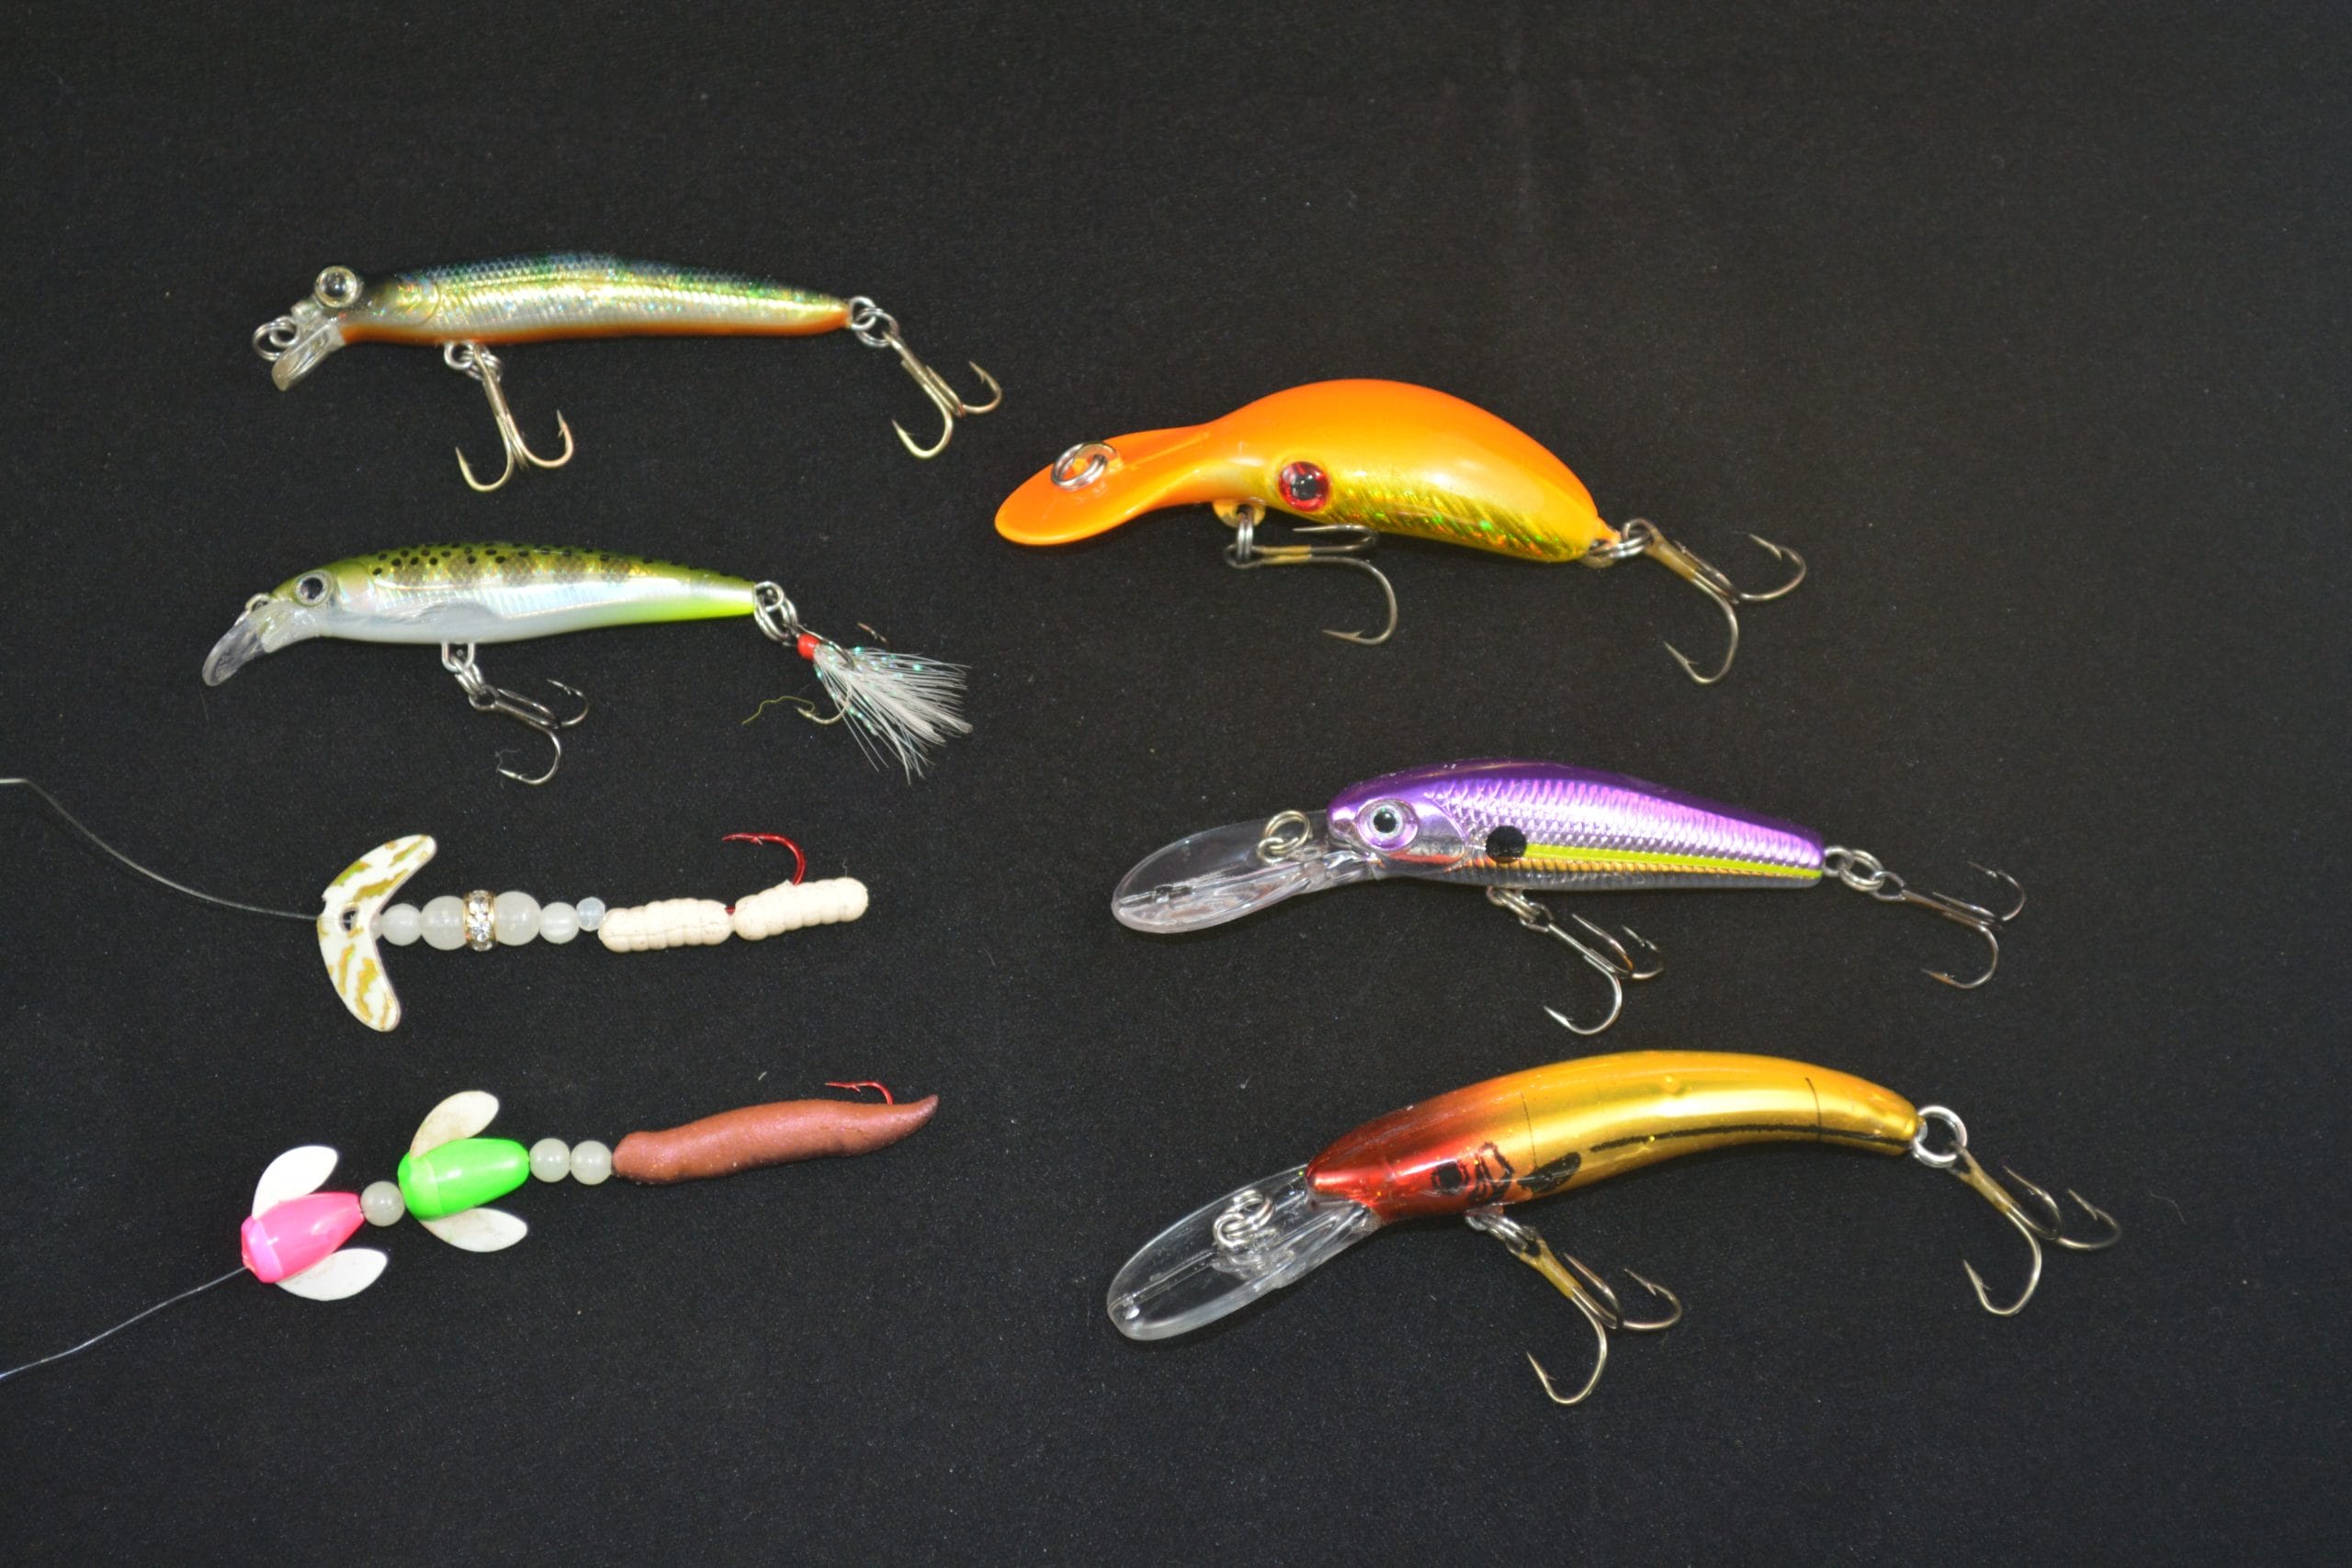 A wide variety of lures work when trolling for panfish. Clockwise from bottom left: Two Worden’s #14 Spin-N-Glos baited with a Gulp 1-inch Pinched Crawler, Mack’s Wedding Ring with two Power Bait Wigglers, Size 04 Rapala X-Rap, Spro Mini Jerkbait, Lindy 3/16-ounce River Rocker, Storm 3 ½-inch Mad Flash Thunderstick and Reef Runner Mini-Rip.